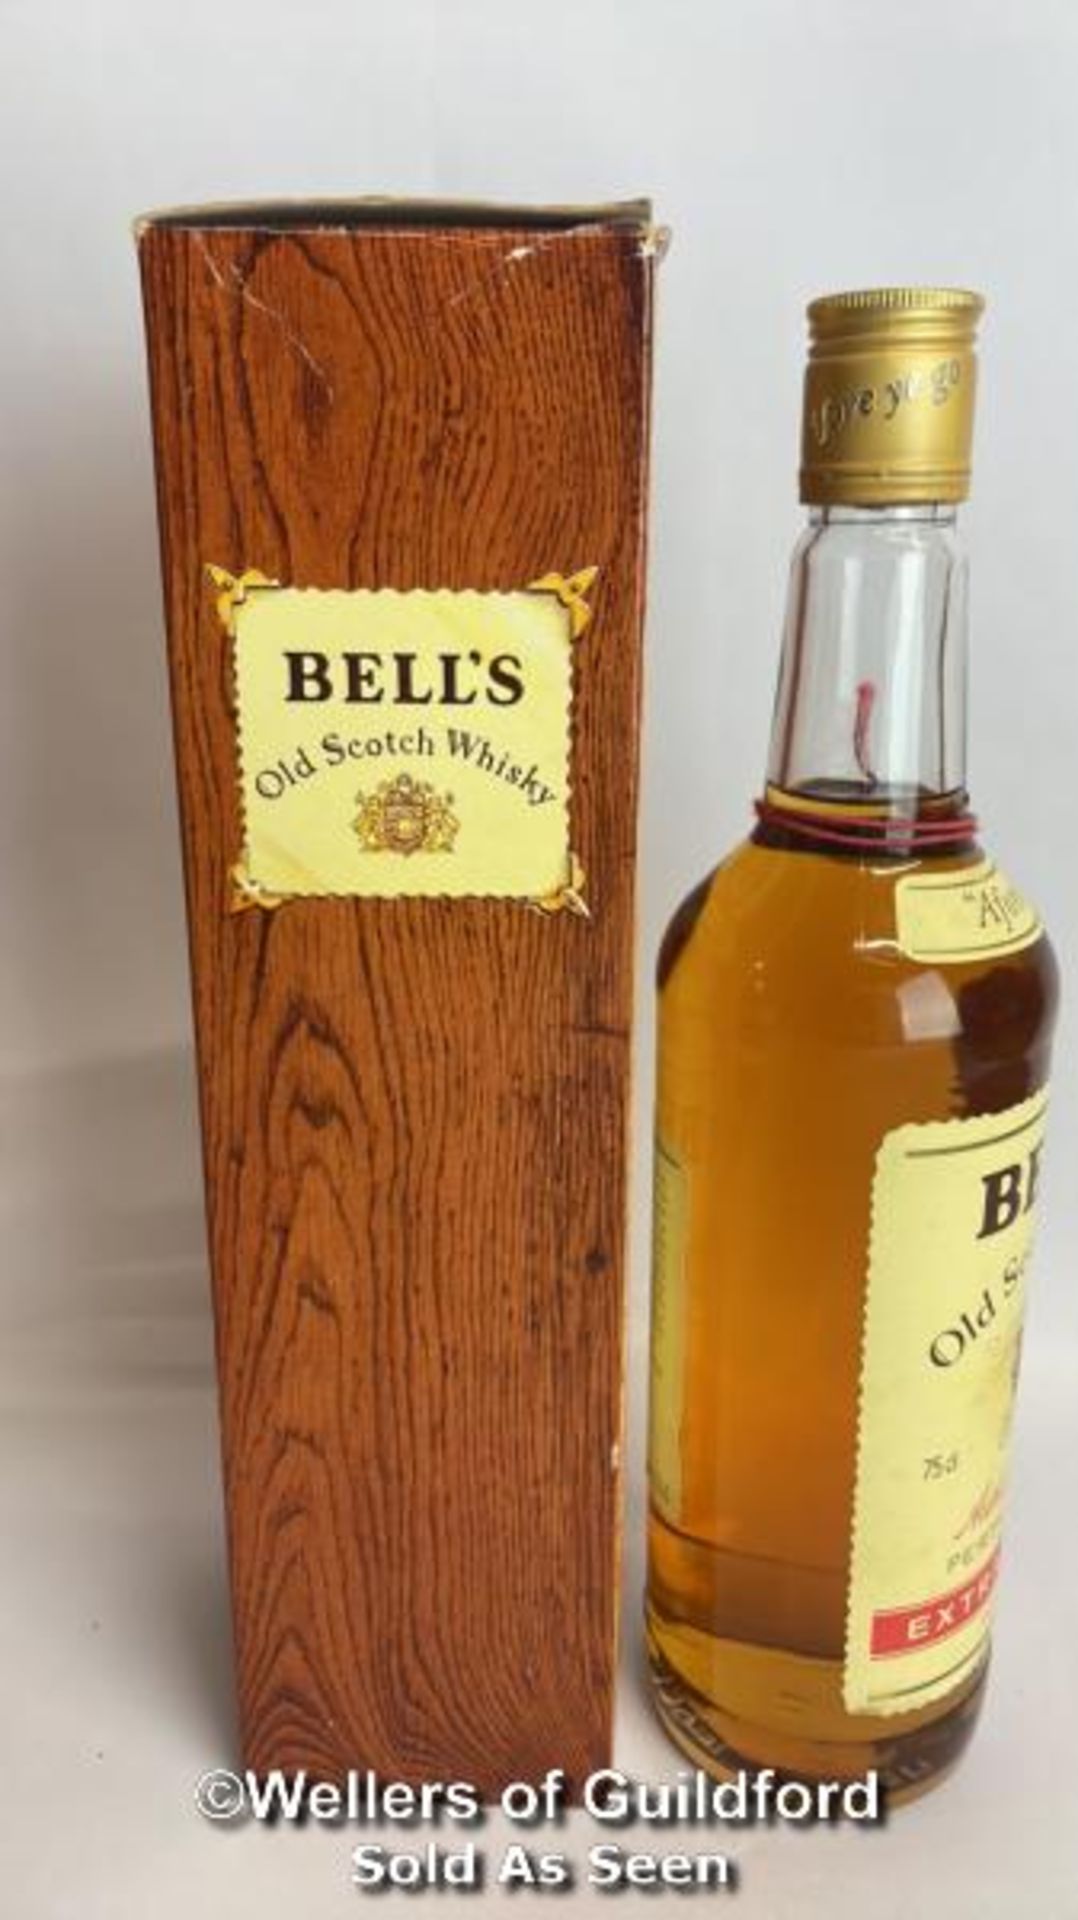 Bell's Extra Special Old Scotch Whisky, "Afore Ye Go", 75cl, 43% vol, In original box / Please see - Image 8 of 12